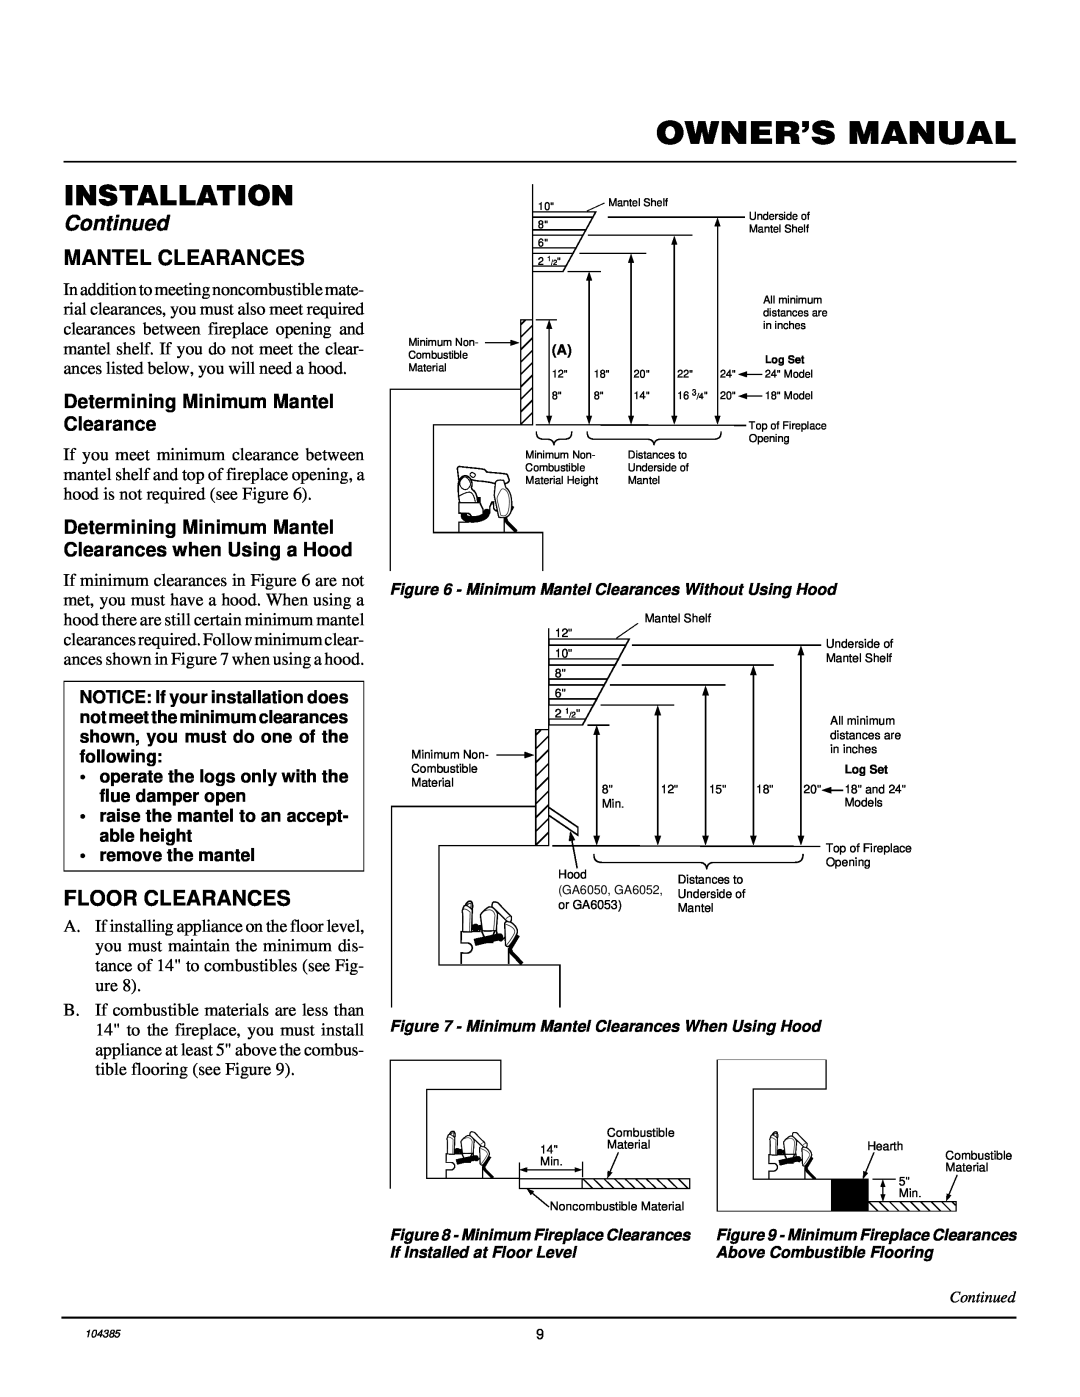 Desa CLD3018N, CLD3924NT, CCL3930NT(A) installation manual Mantel Clearances, Floor Clearances, Installation, Continued 